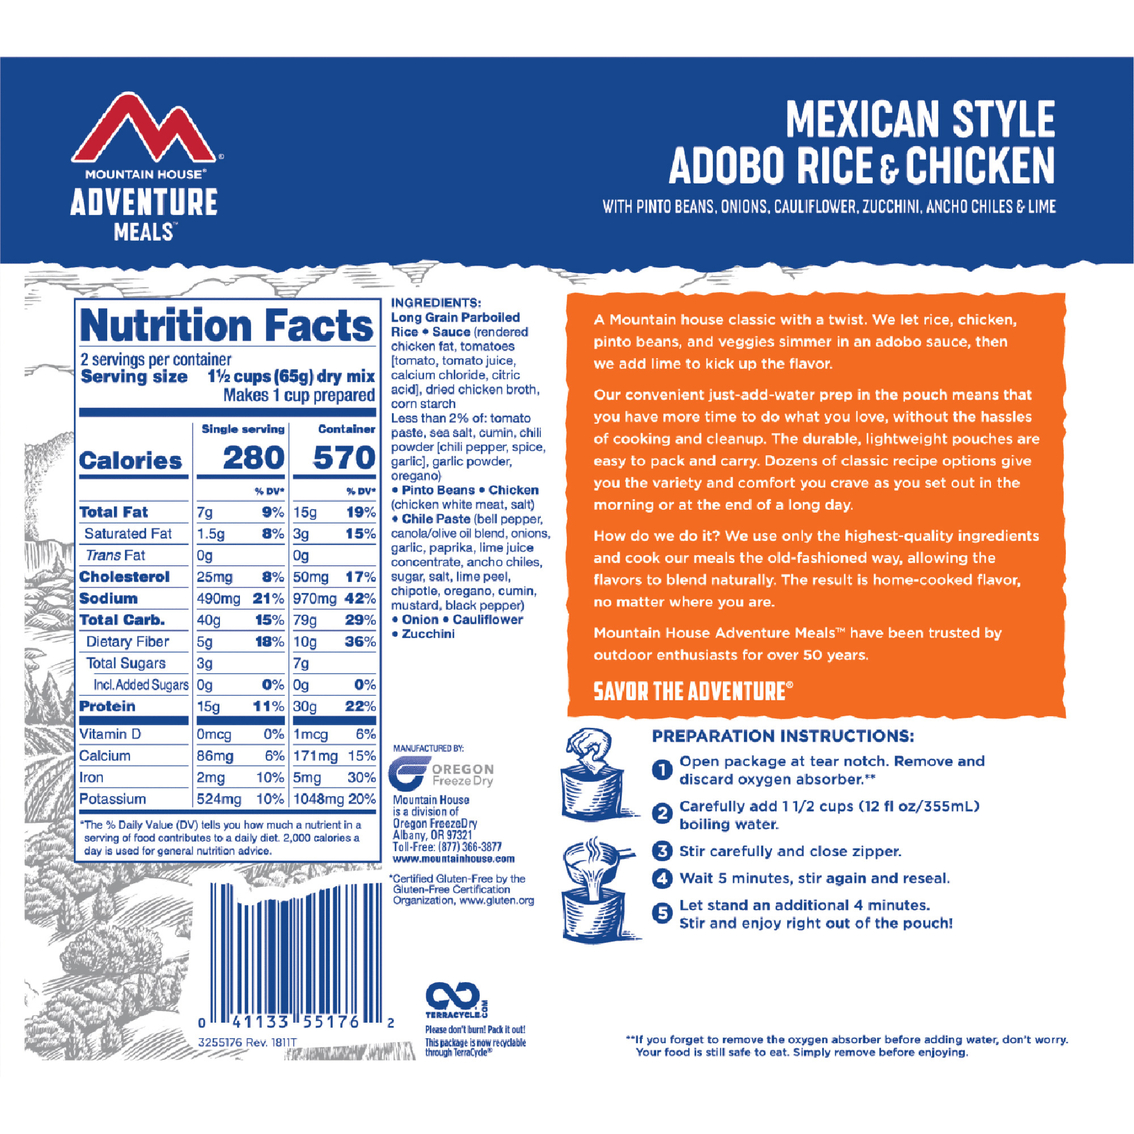 Mountain House Mexican Style Adobo Rice & Chicken 6 pouches, 12 srv. - Image 3 of 3